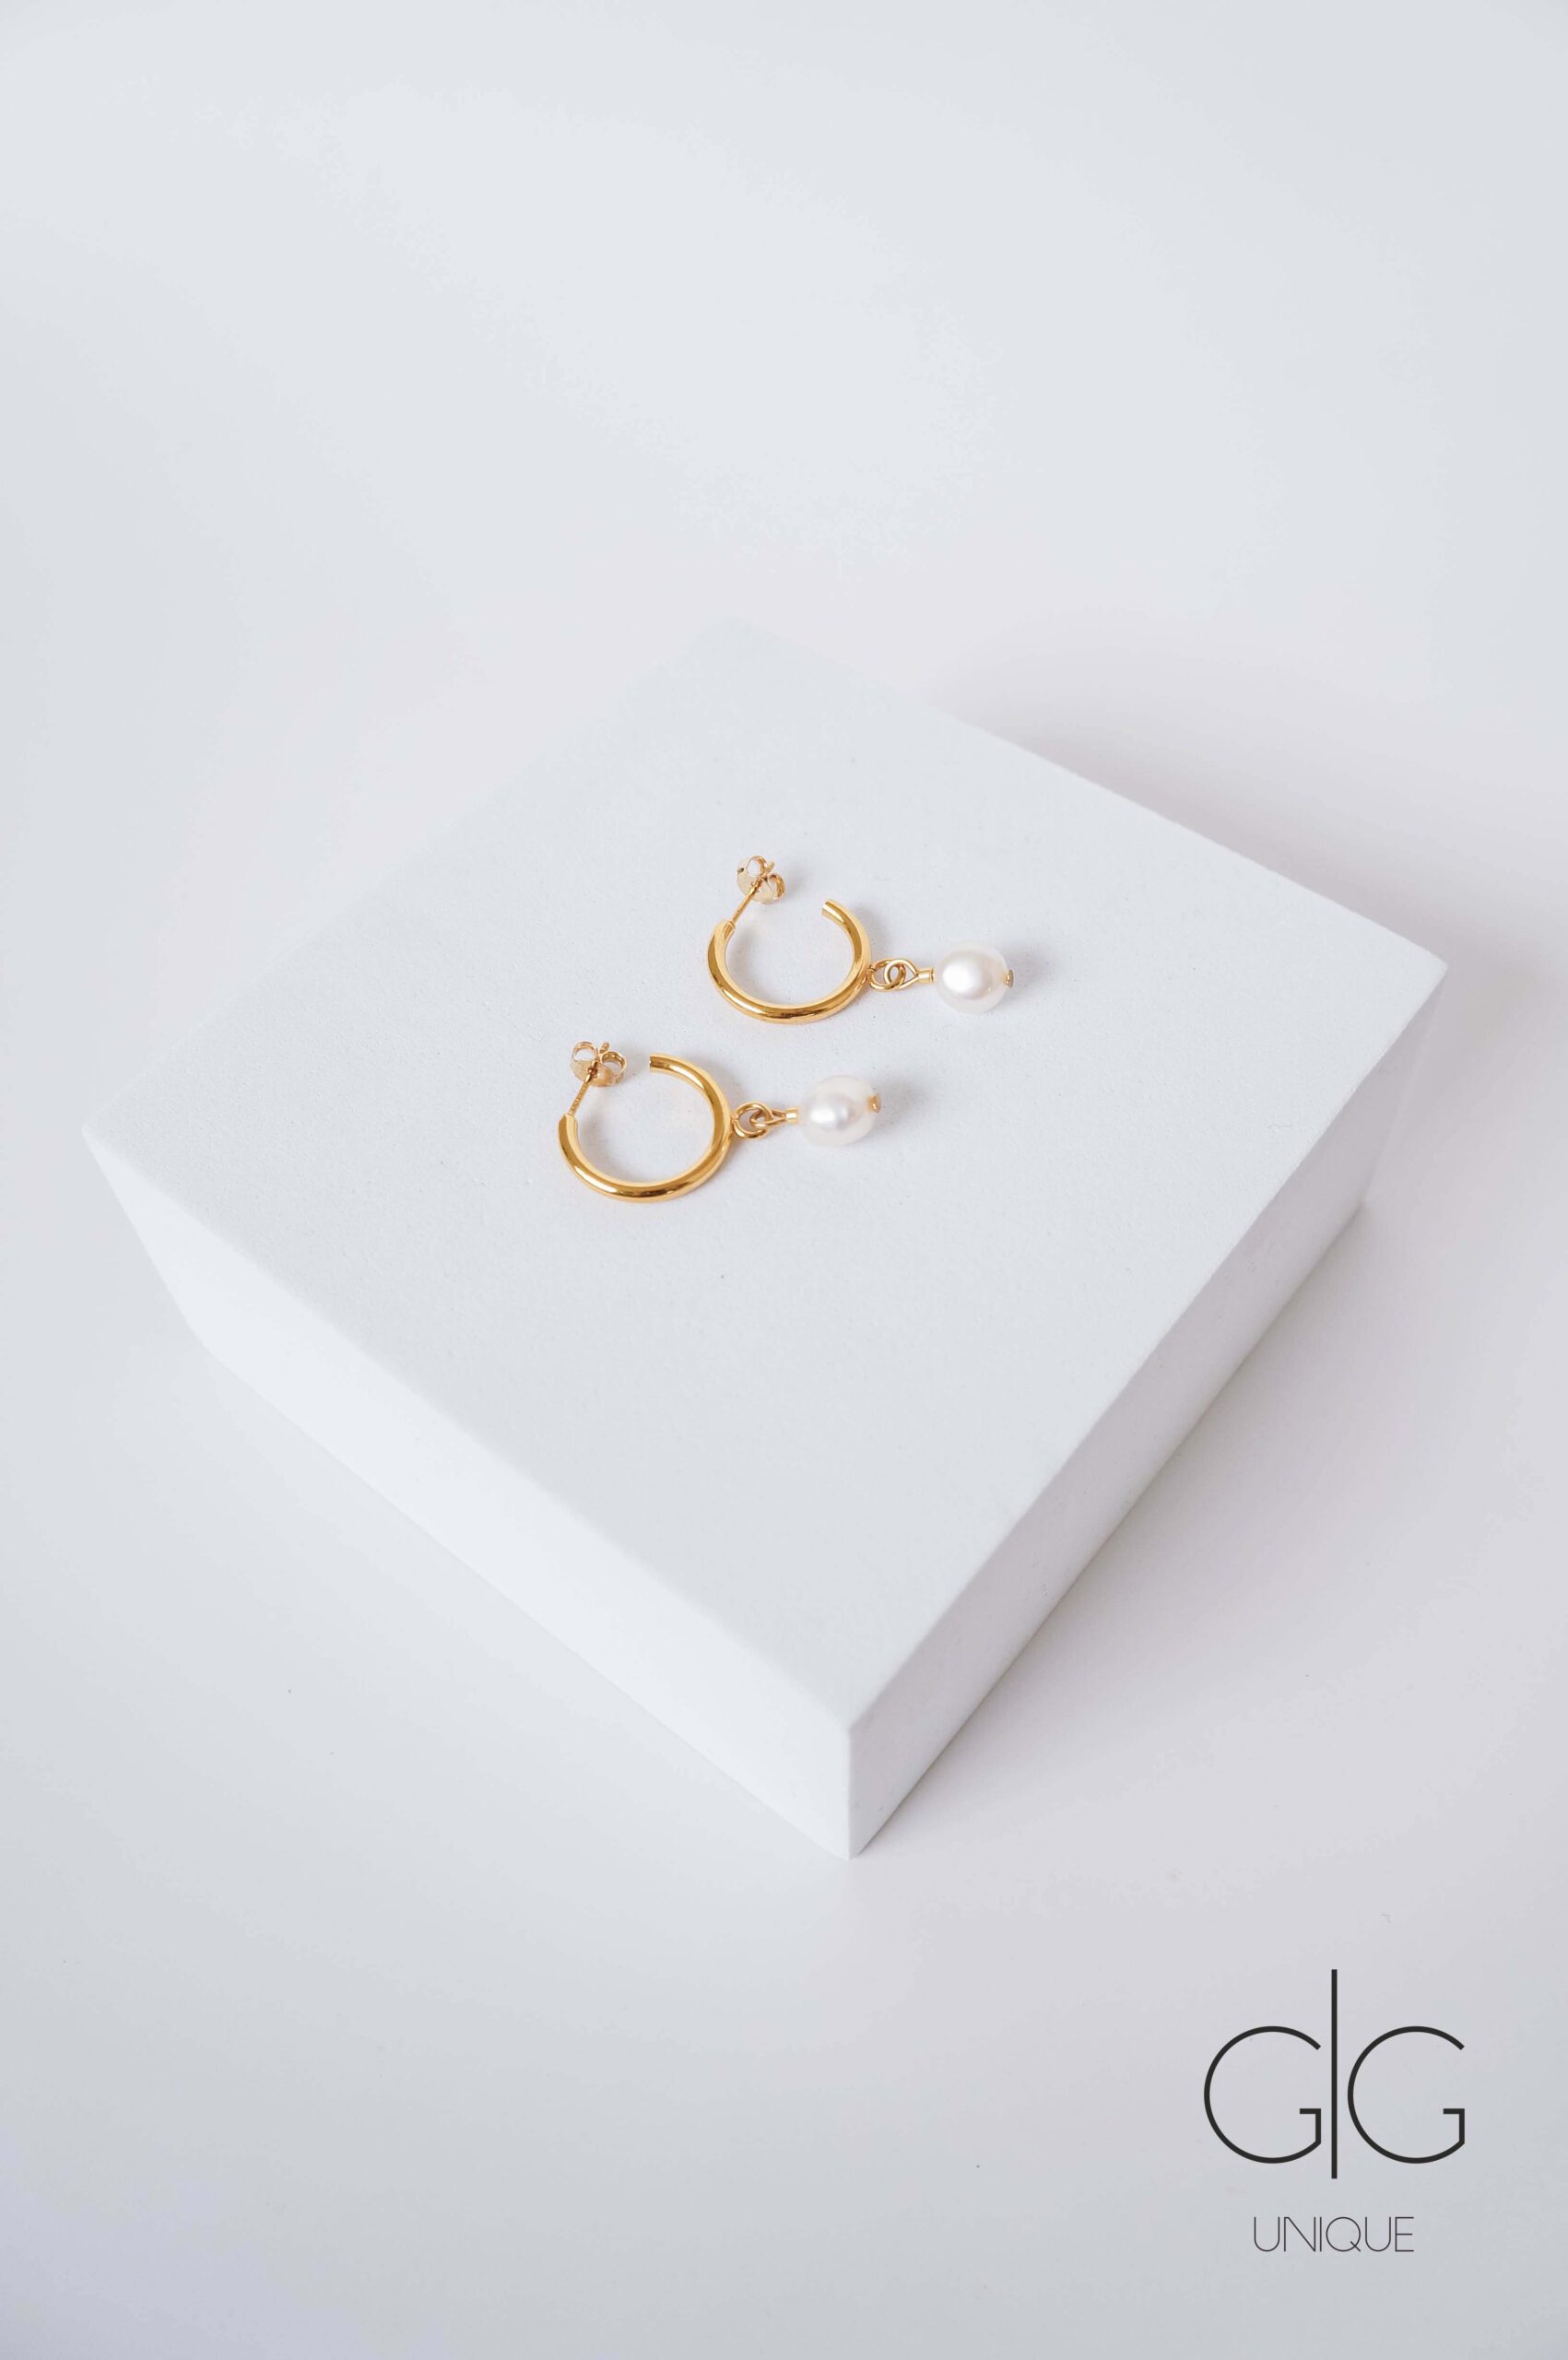 Mini golden hoop earrings with fresh-water pearls - GG Unique